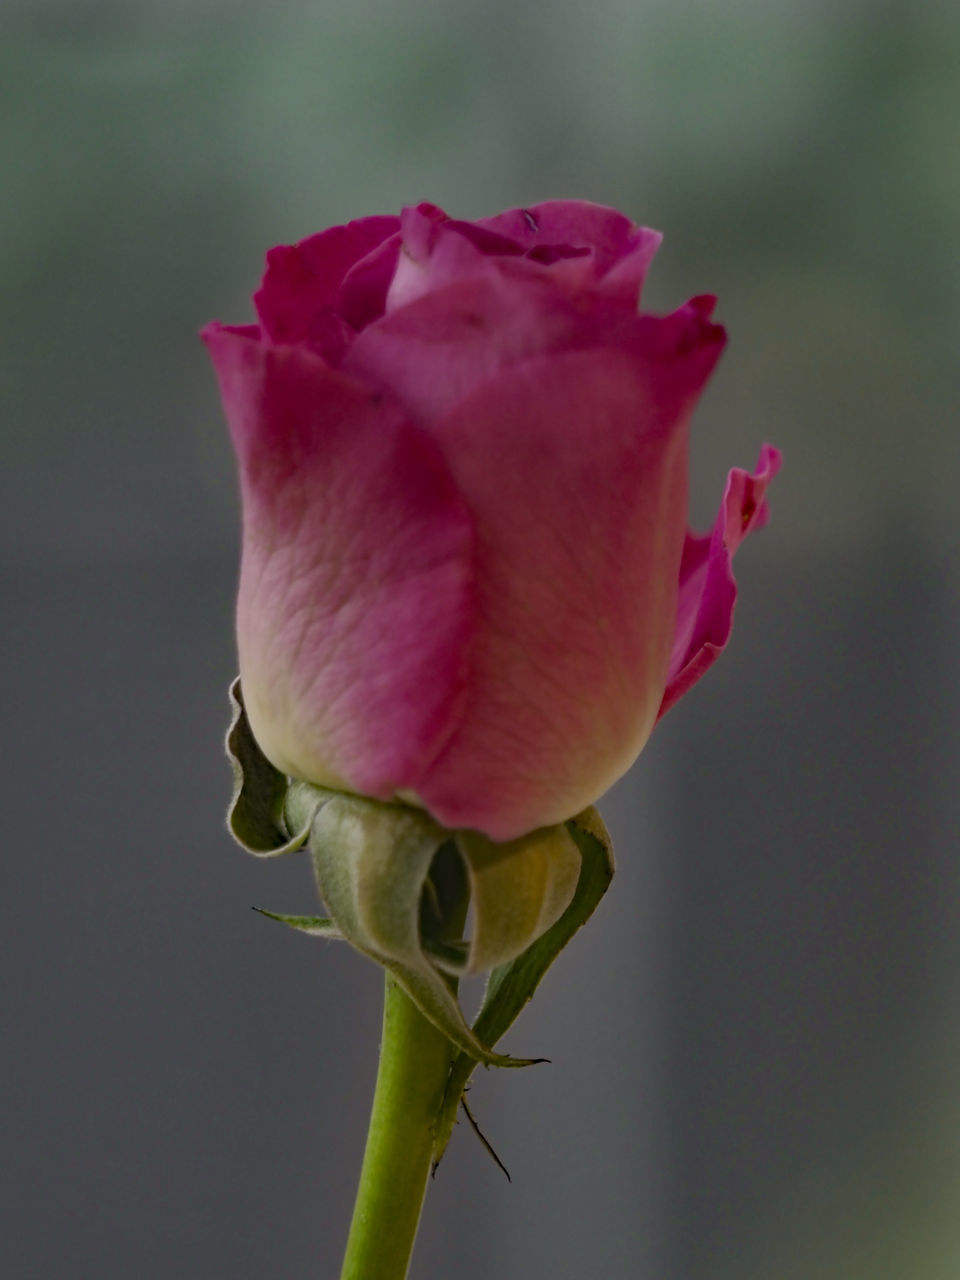 CLOSE-UP OF PINK ROSE AGAINST WHITE BACKGROUND